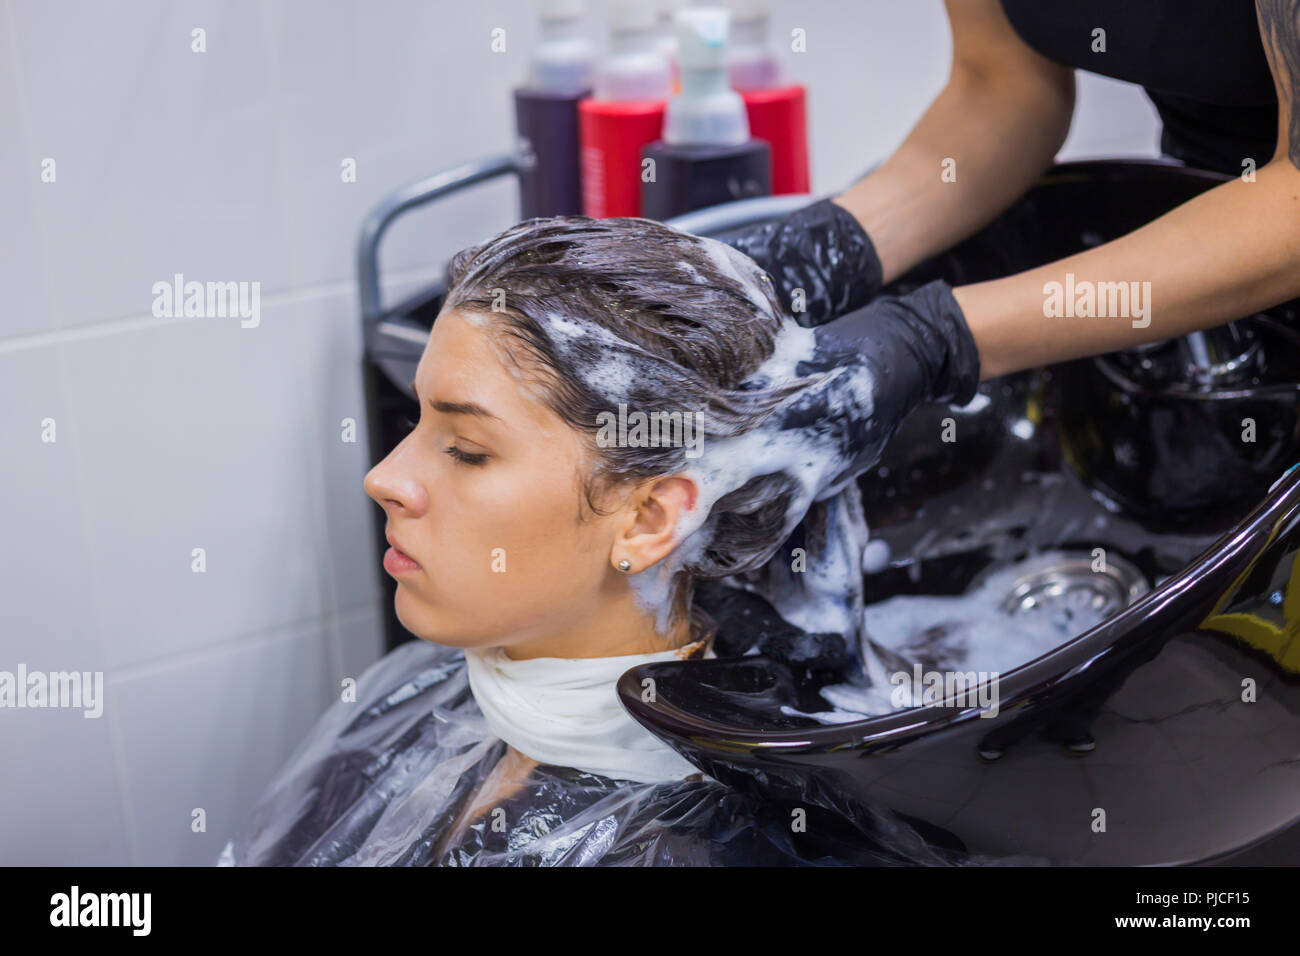 Hairdresser washing hair of woman client Stock Photo